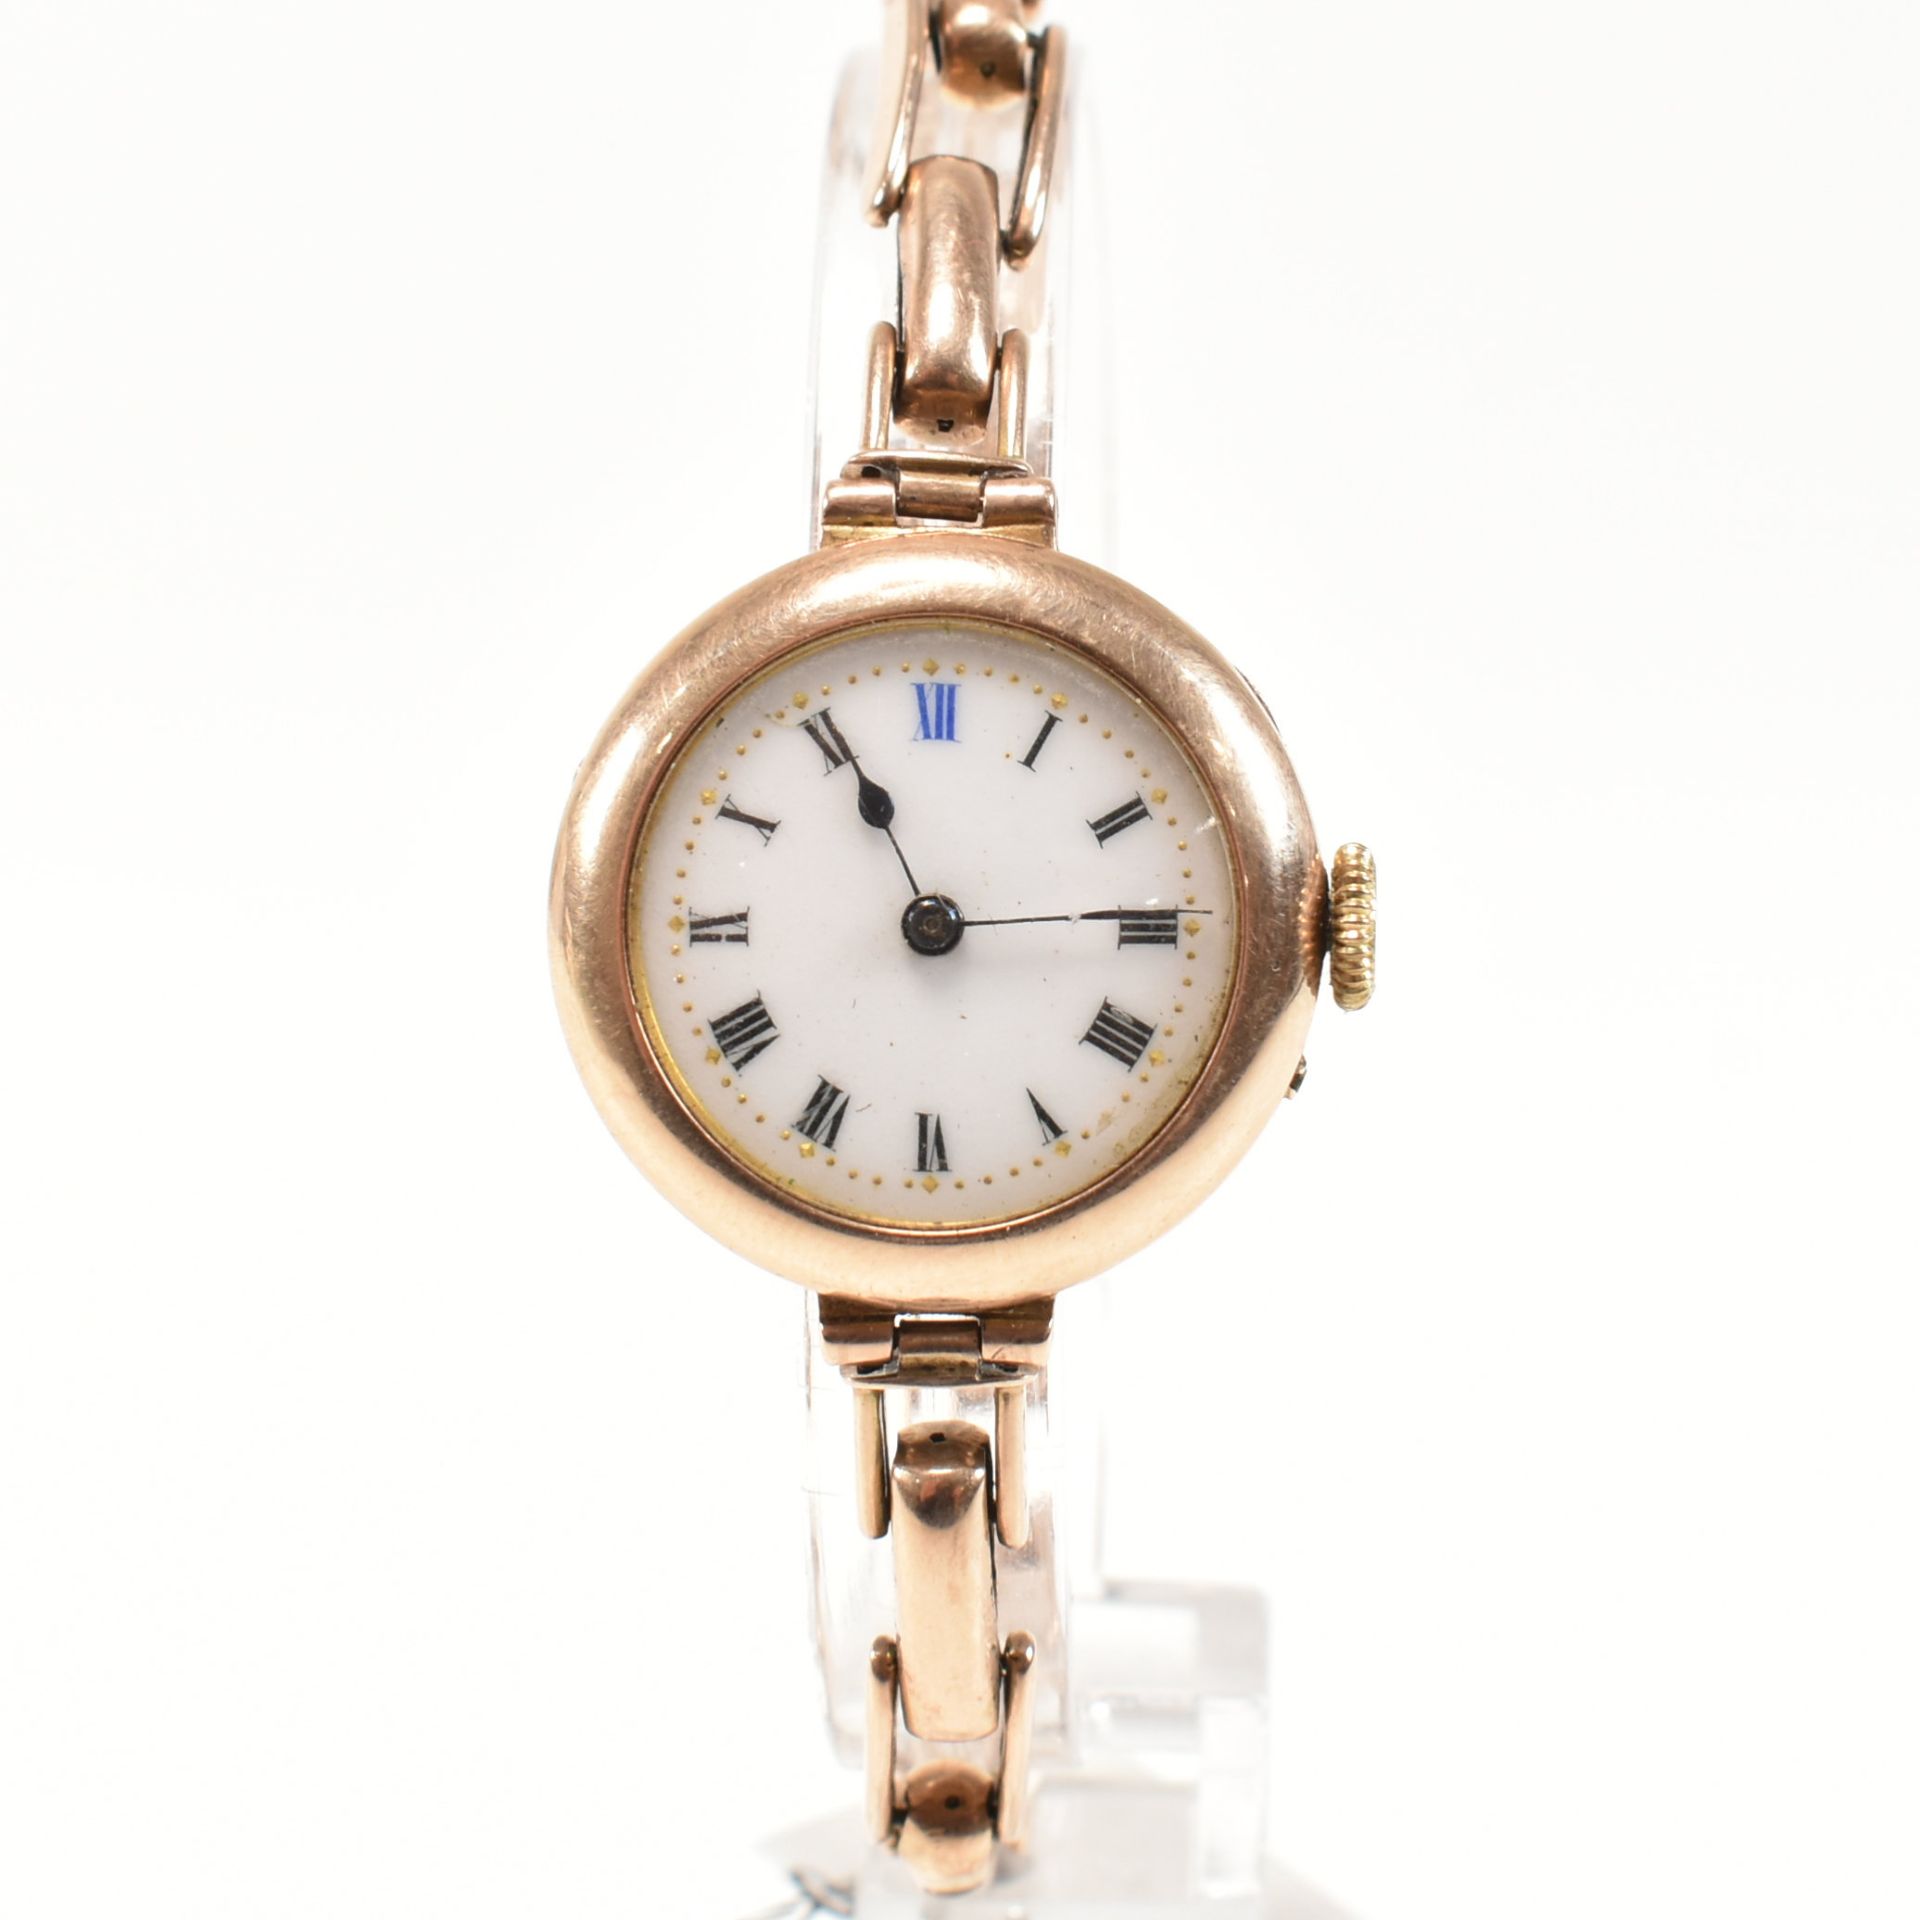 EARLY 20TH CENTURY 9CT GOLD LADIES DRESS WRISTWATCH - Image 7 of 7